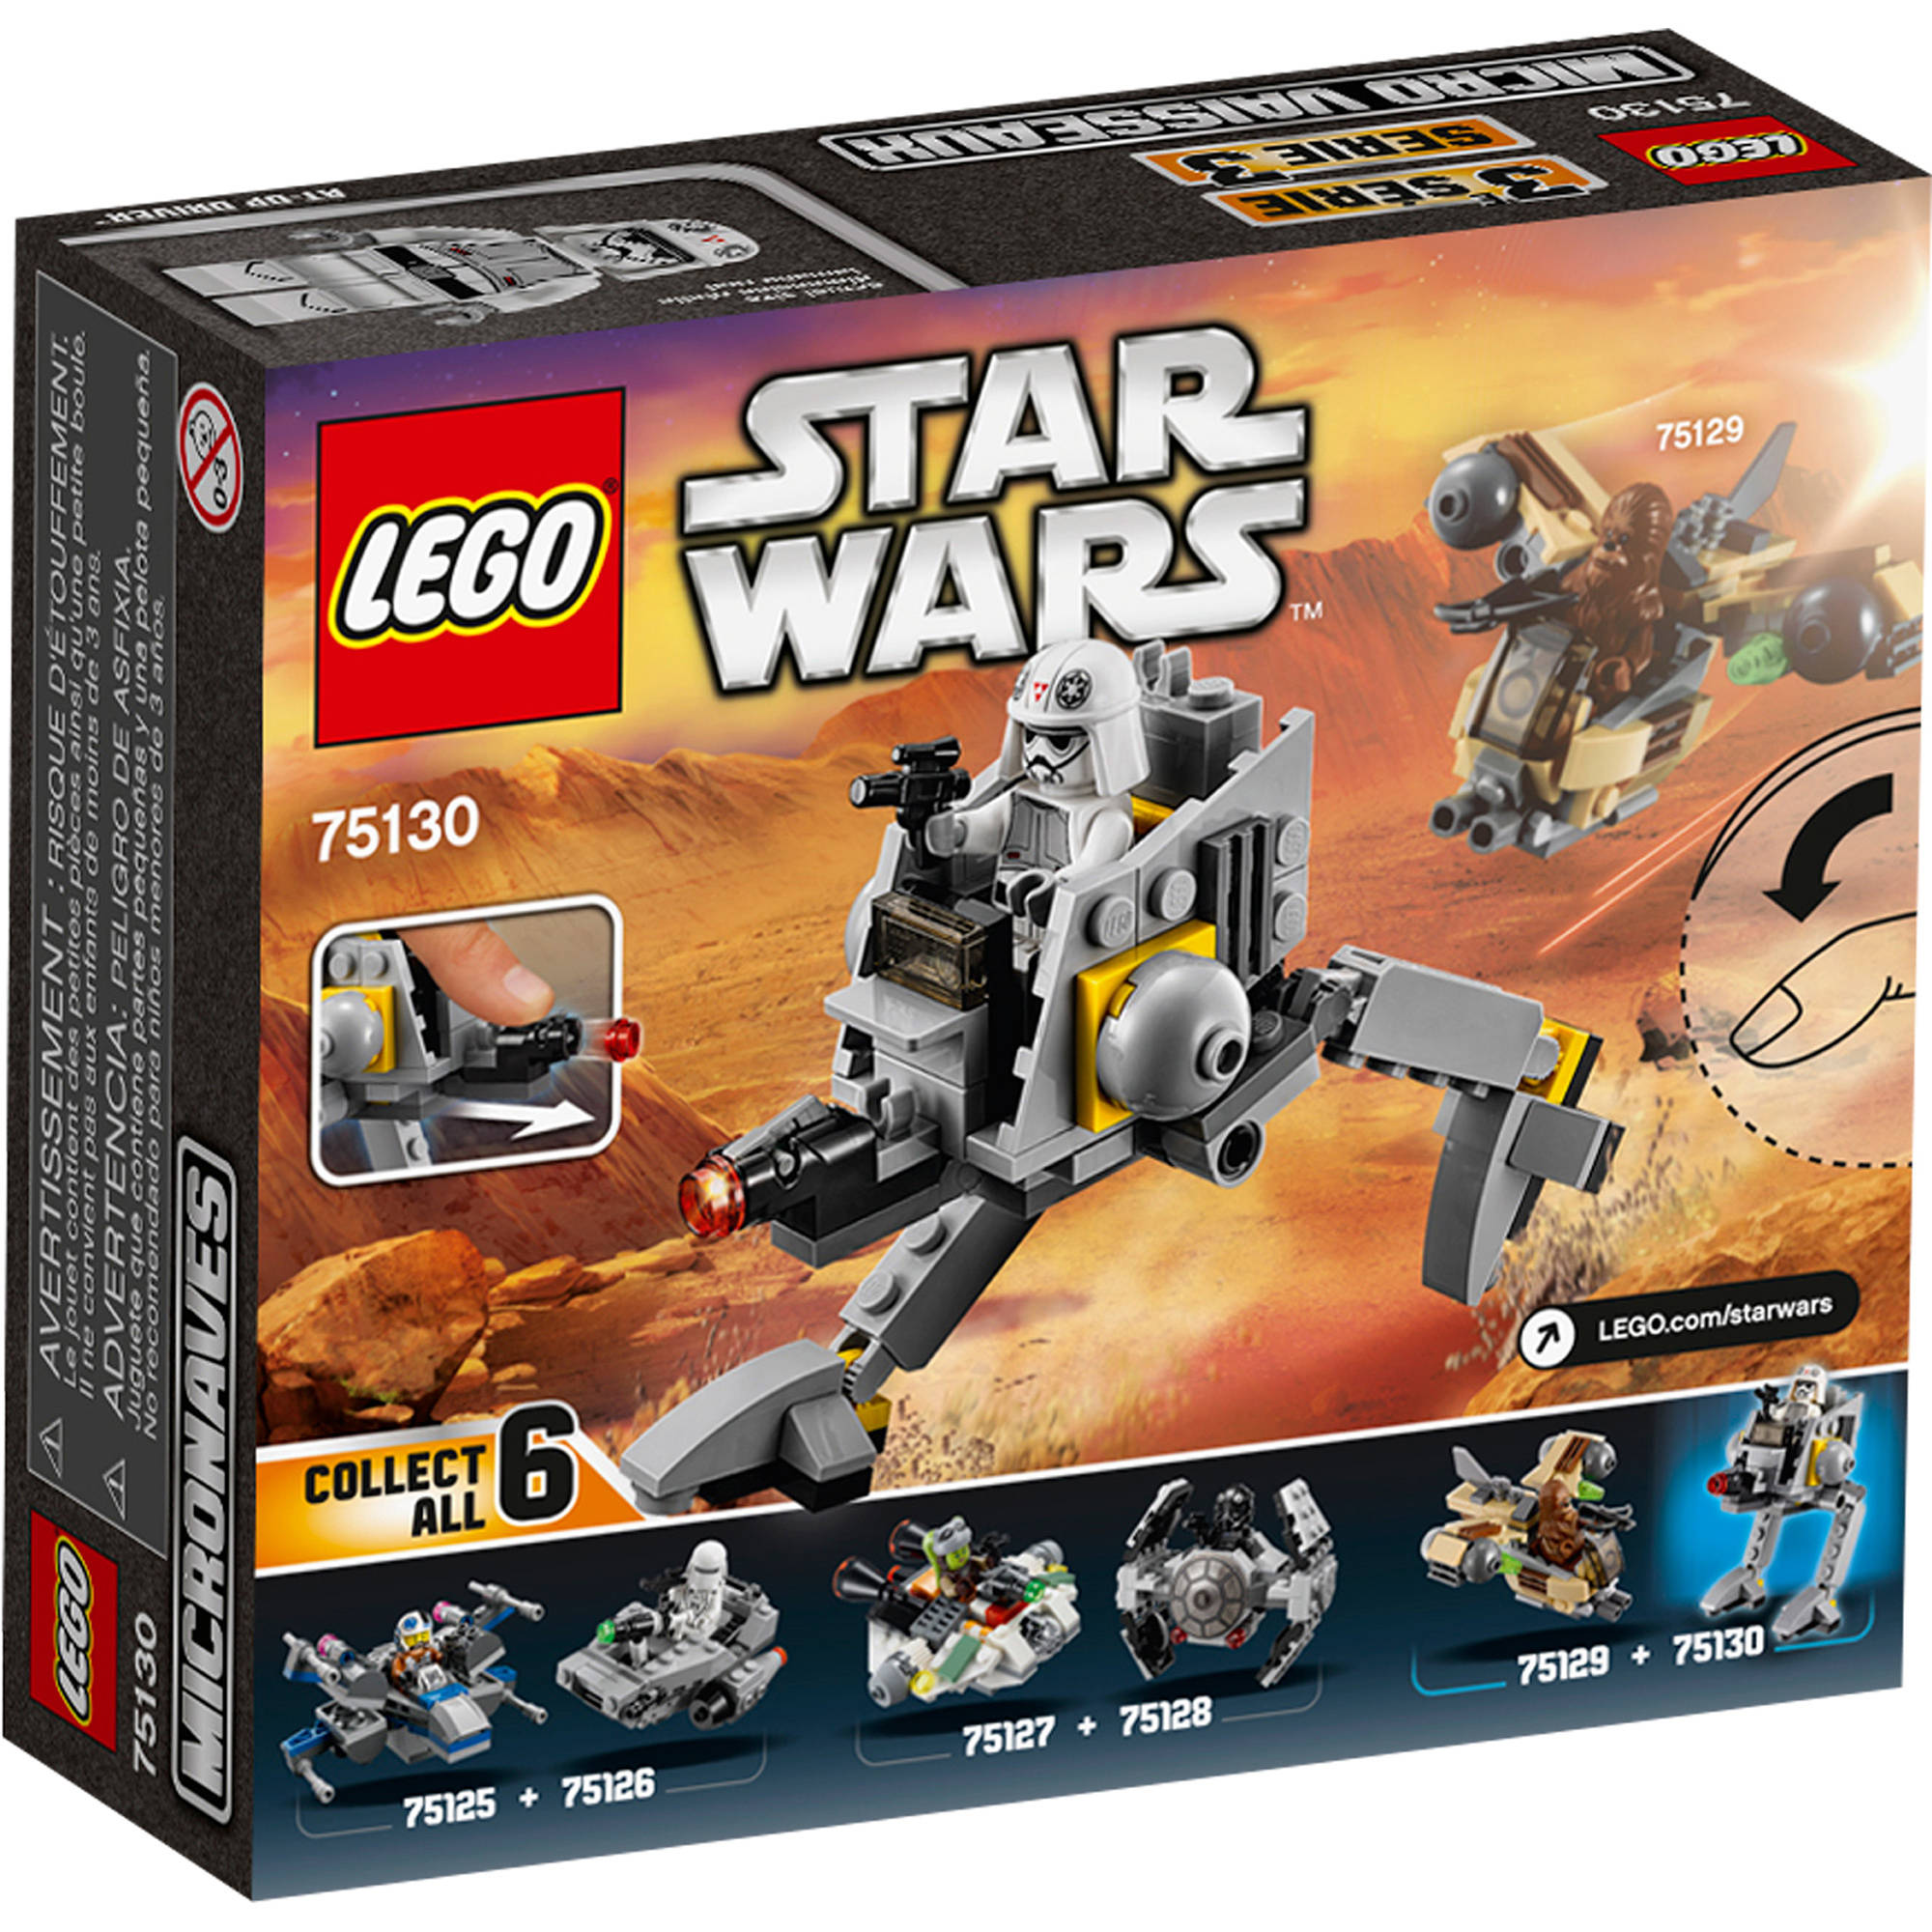 New Star Wars Rebels ATDP Microfighters Lego Set now available!